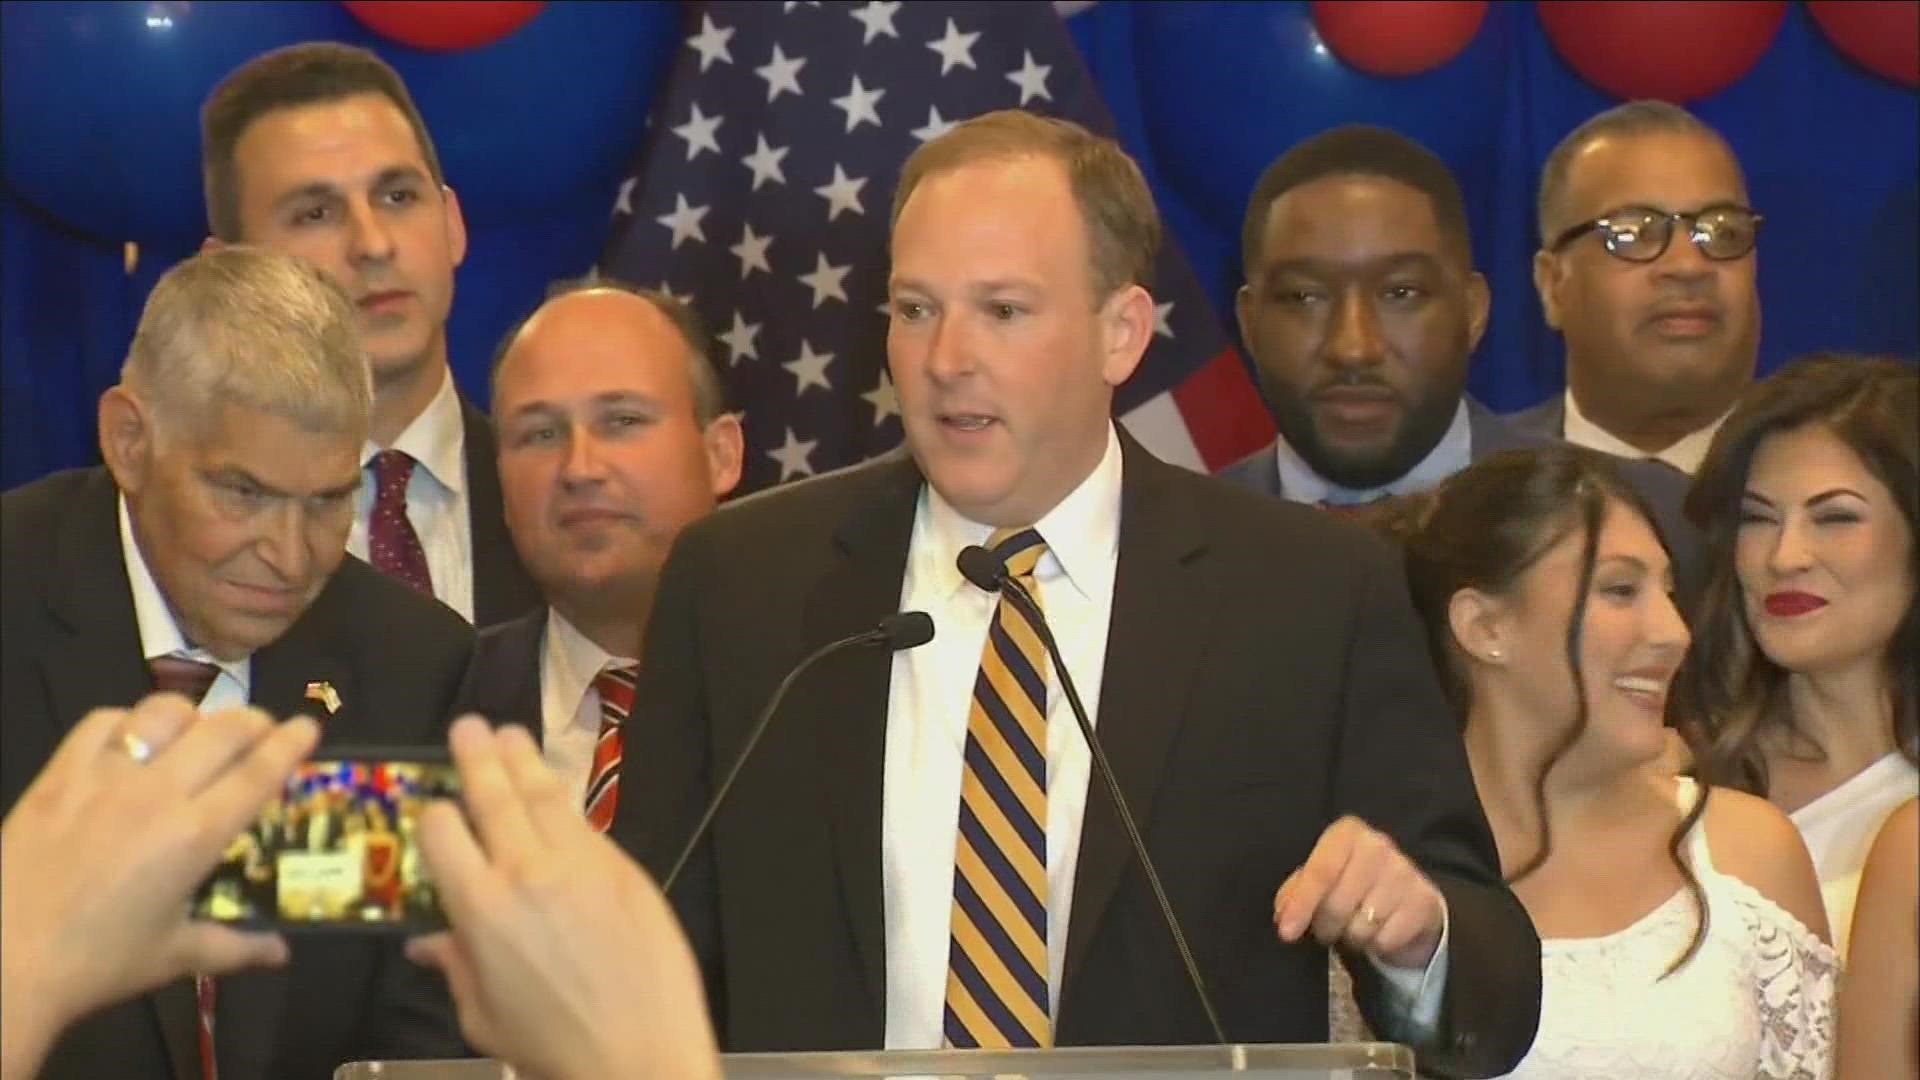 NY Rep. Lee Zeldin says 2 people shot in front of his home 